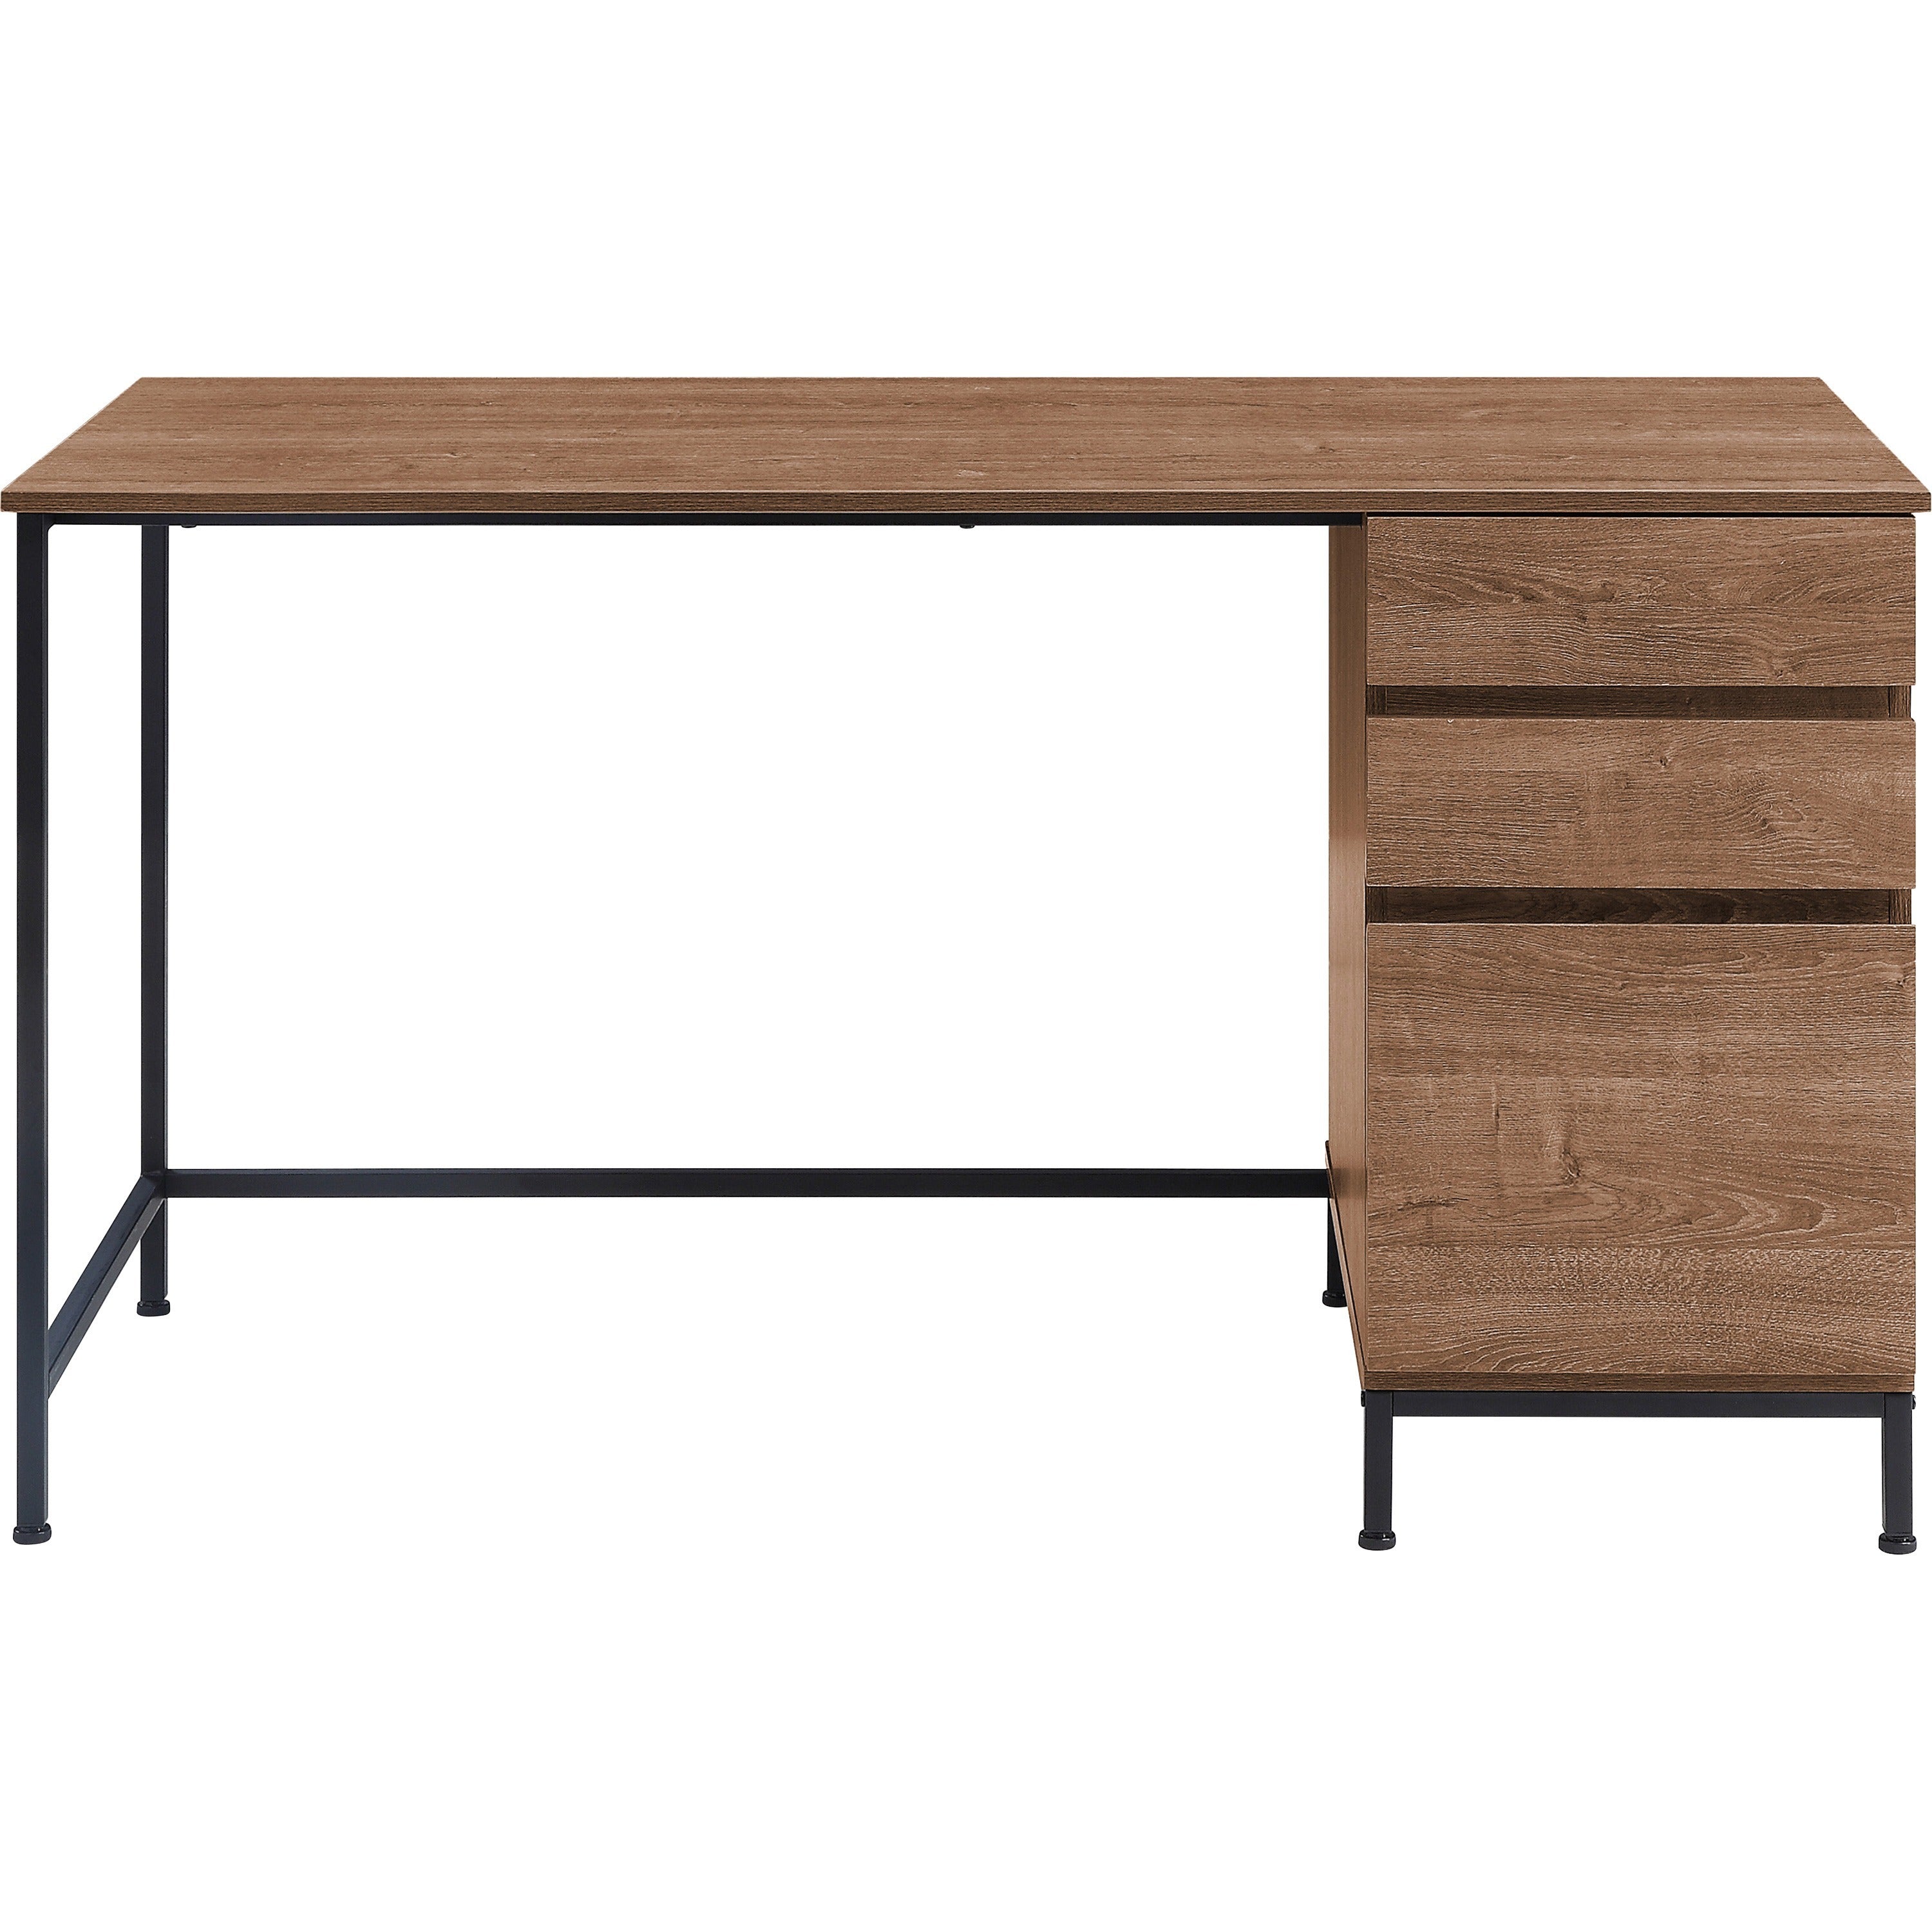 lorell-soho-desk-with-side-drawers-55-x-23630-3-x-file-drawers-single-pedestal-on-right-side-finish-walnut_llr97615 - 2